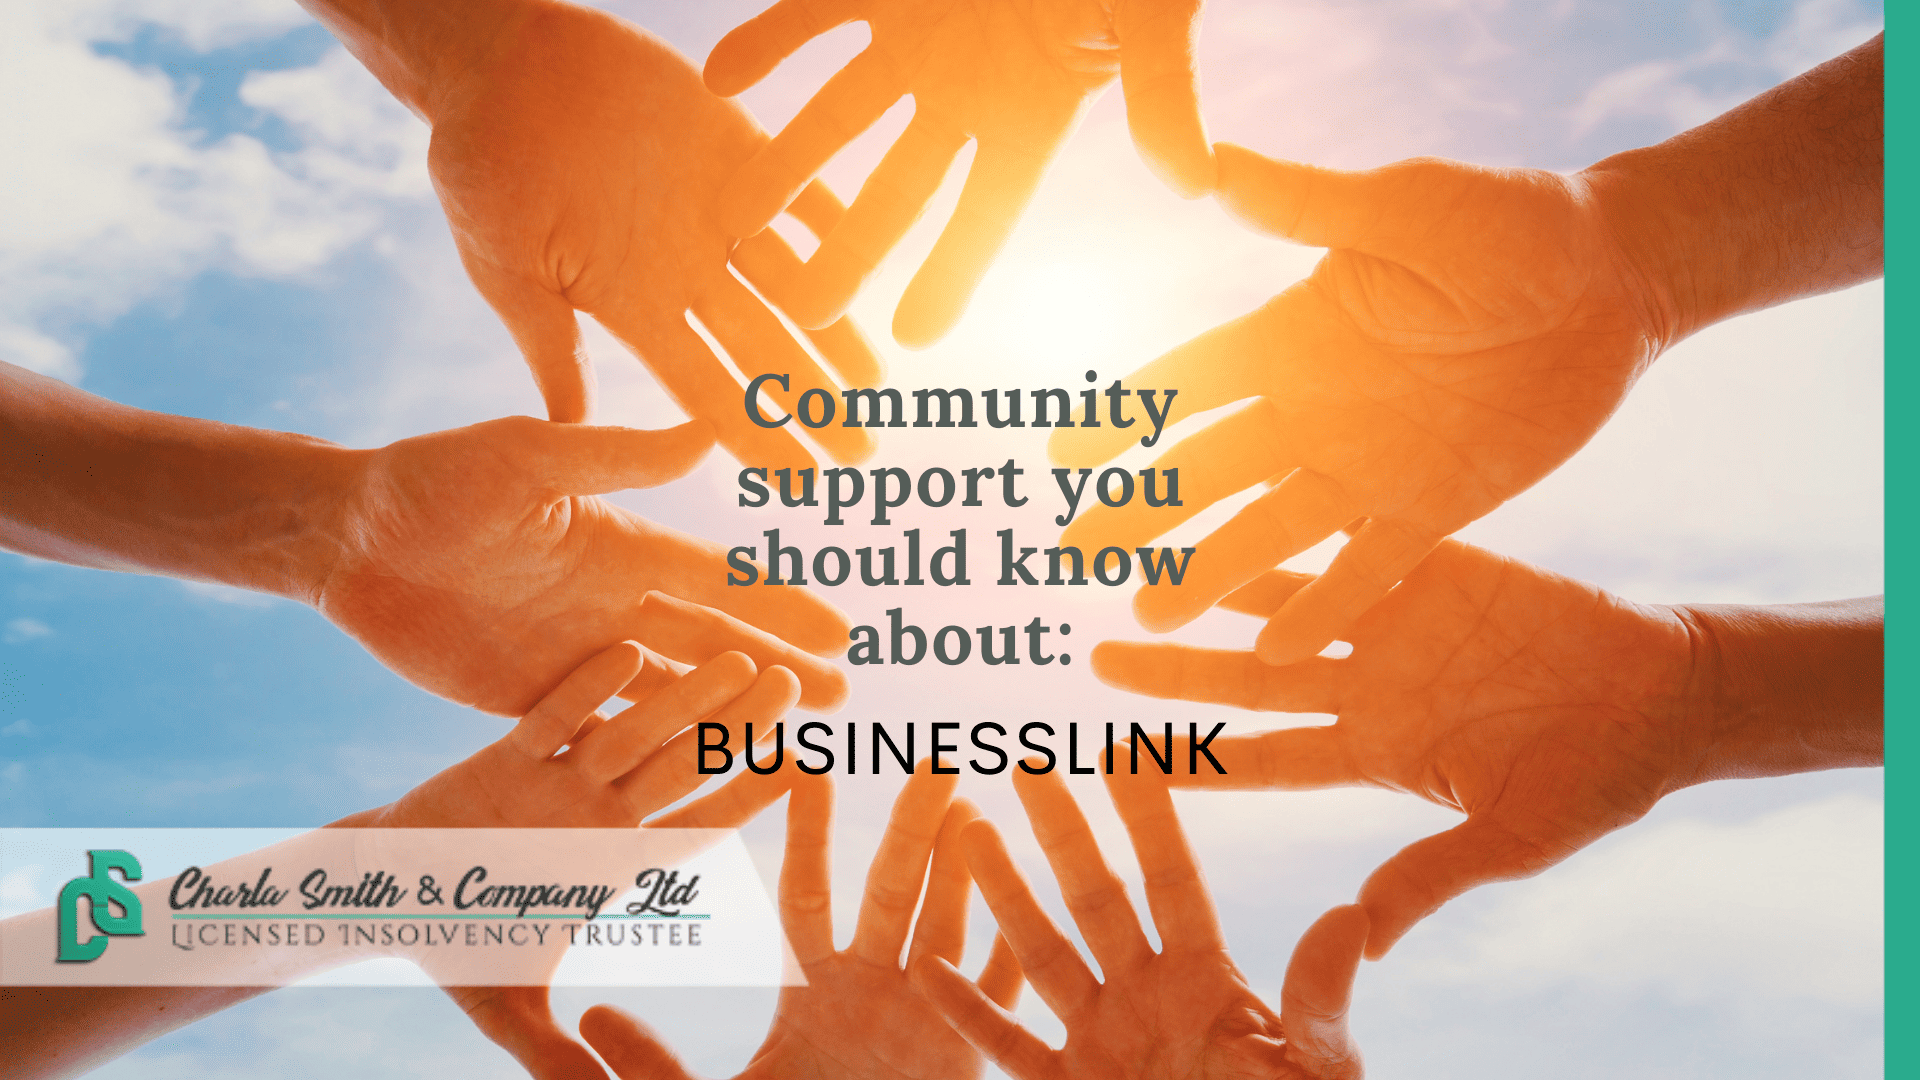 Community support you need to know about: Business Link